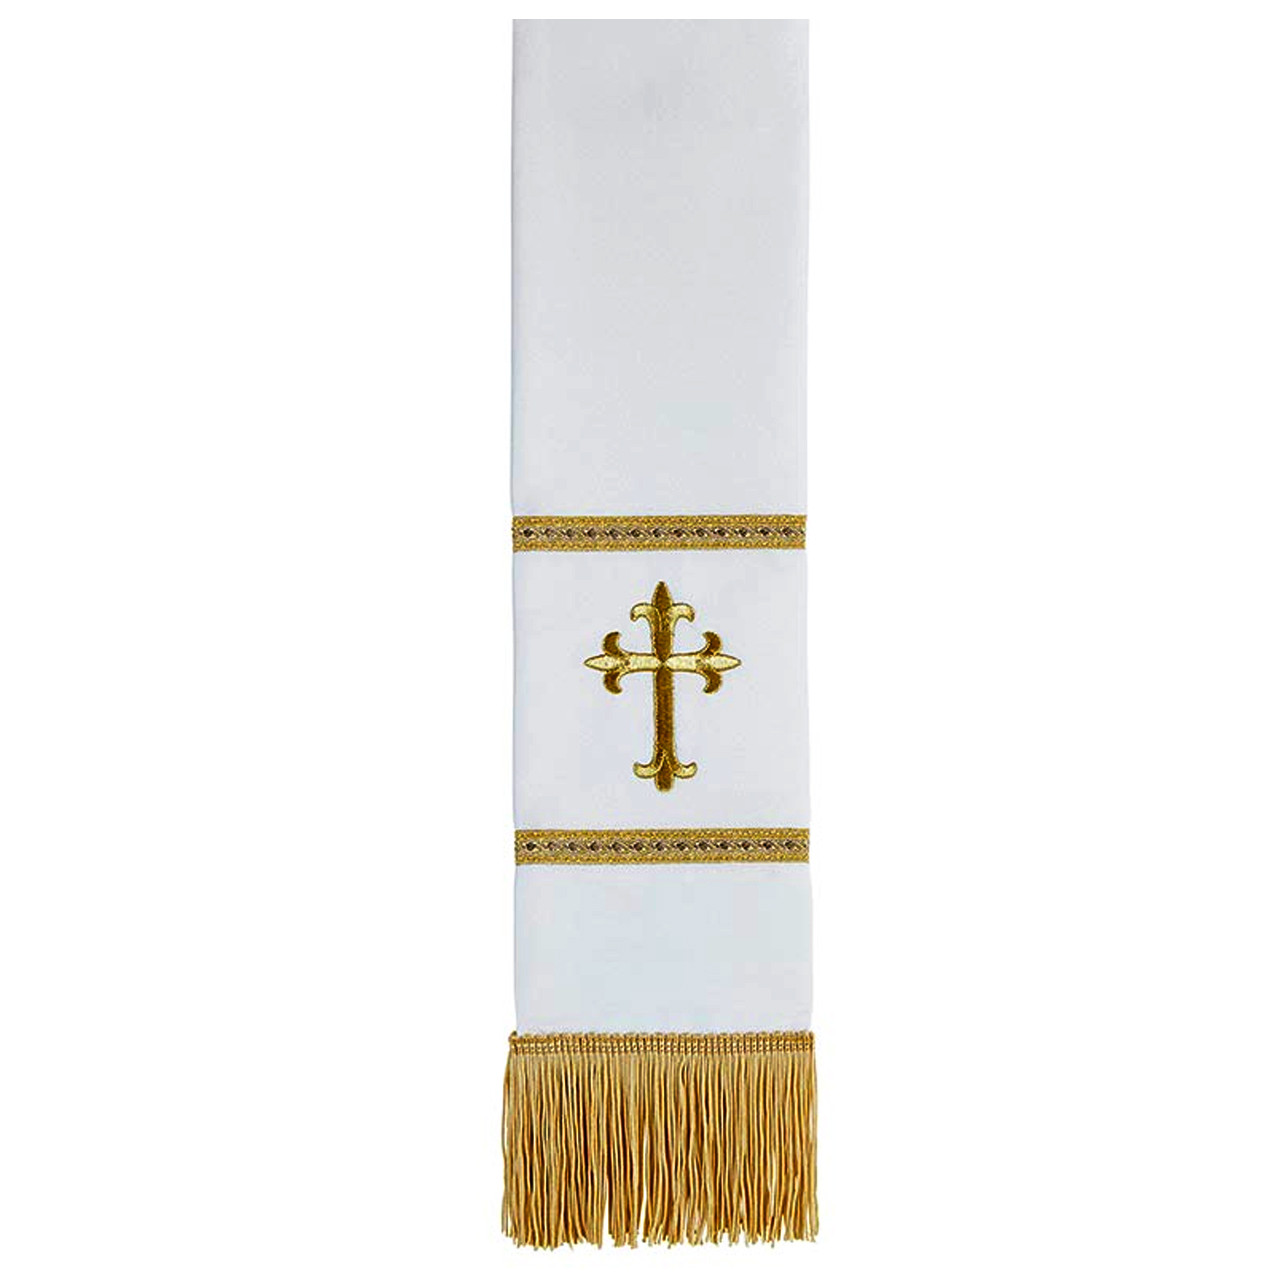 L5065 Our Lady of Guadalupe Chasuble-Inside Stole